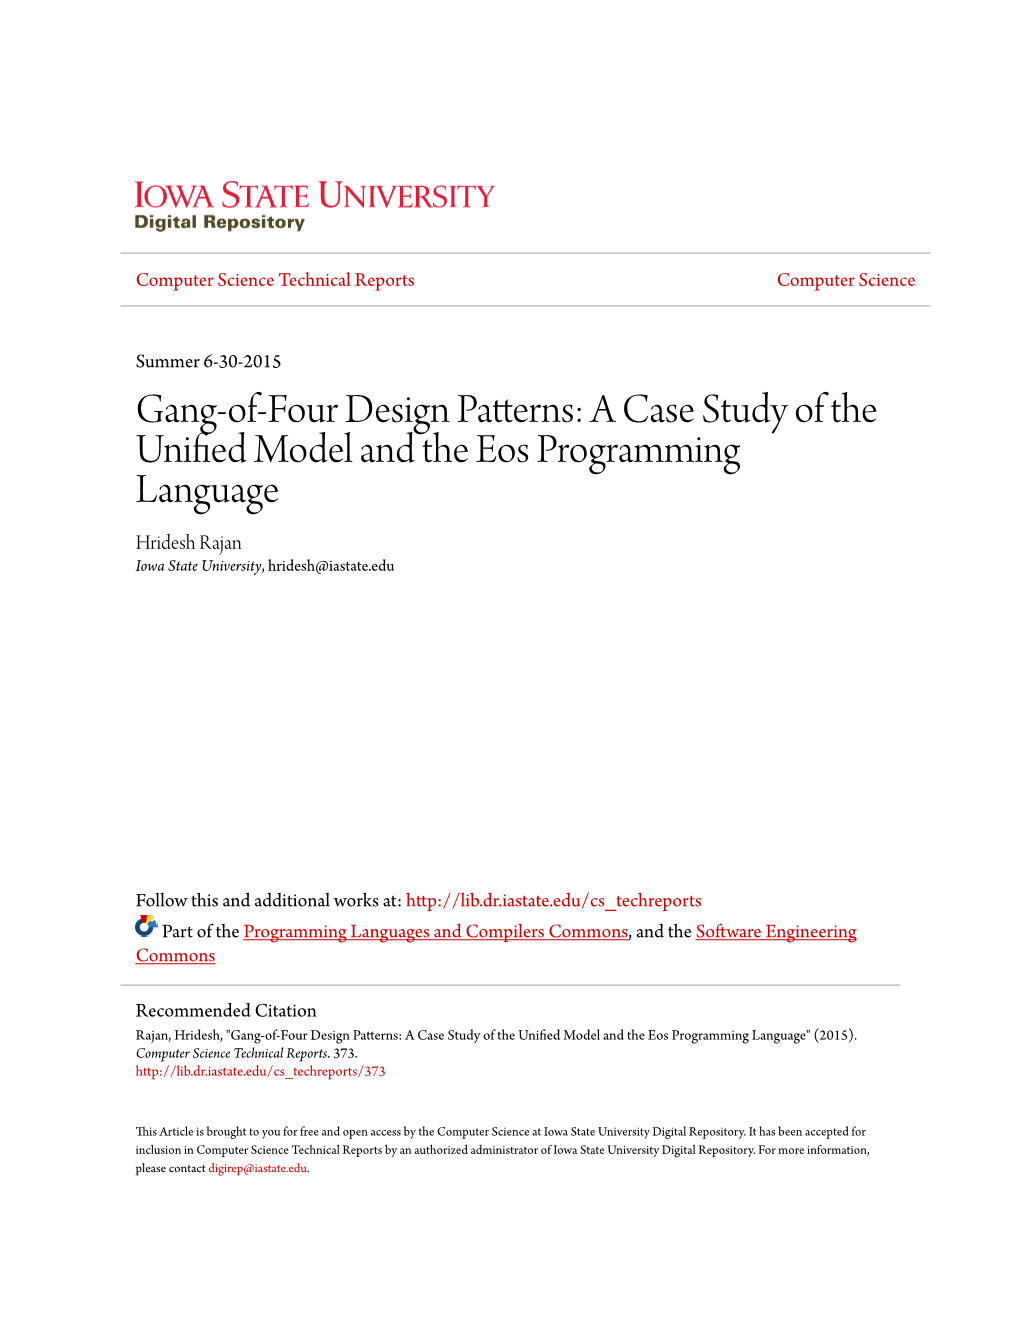 Gang-Of-Four Design Patterns: a Case Study of the Unified Om Del and the Eos Programming Language Hridesh Rajan Iowa State University, Hridesh@Iastate.Edu